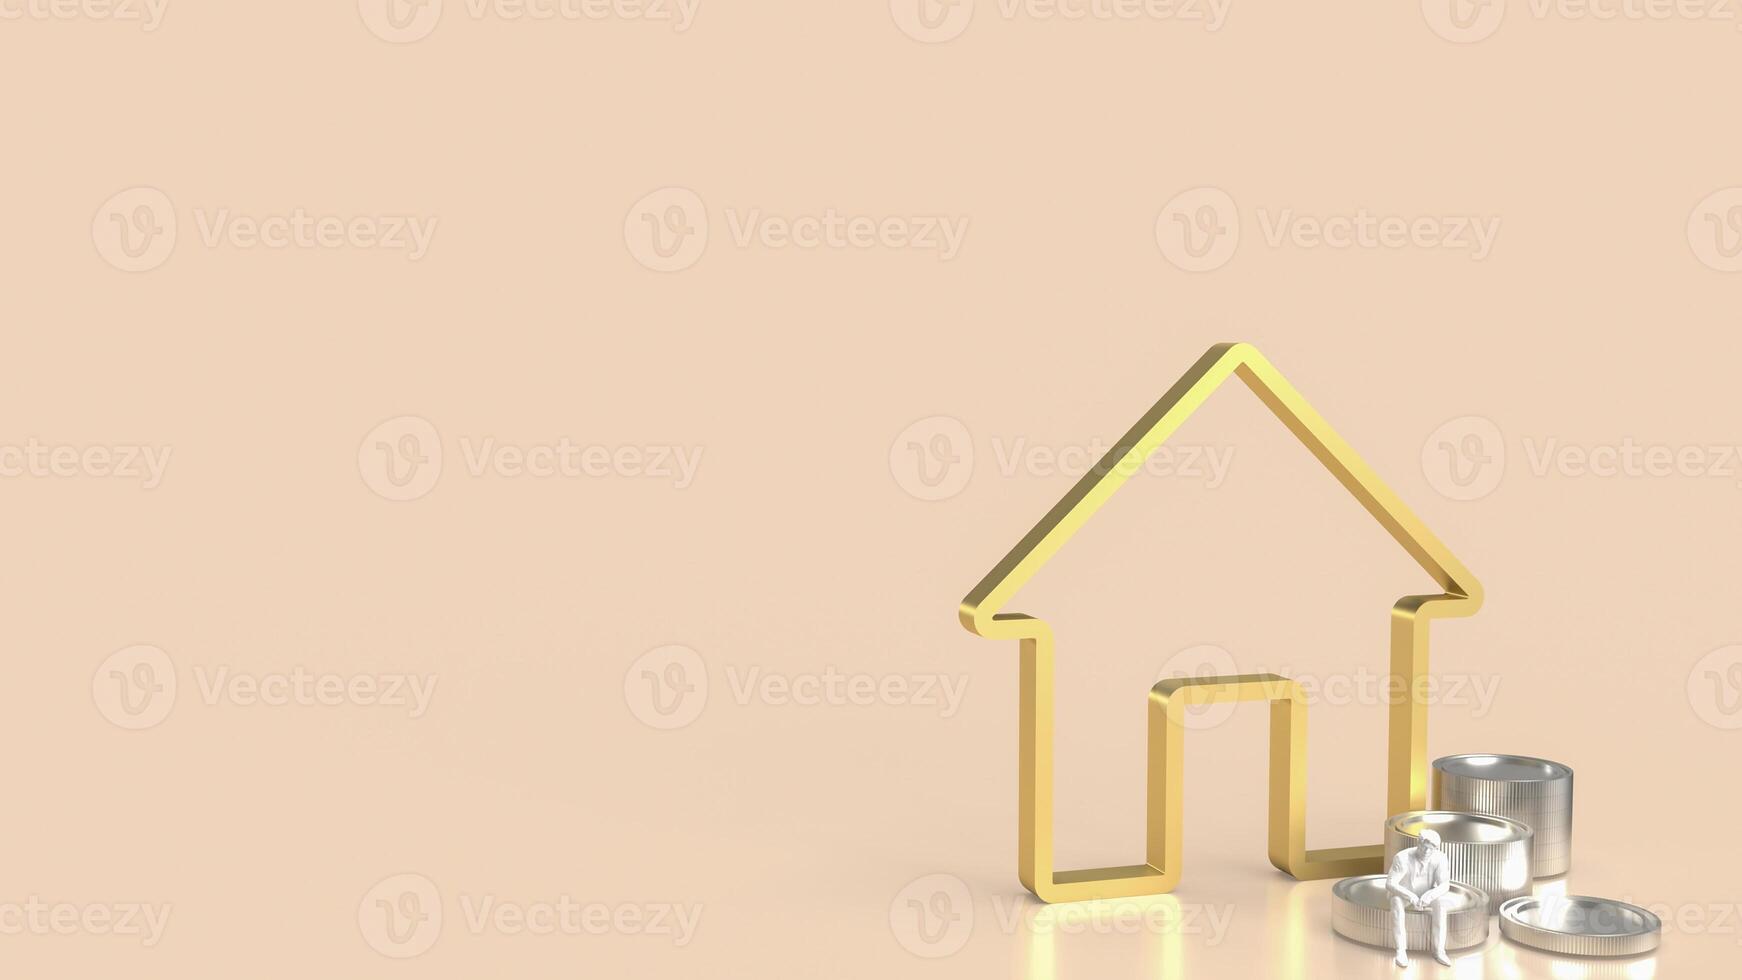 The gold house for property or building concept 3d rendering. photo